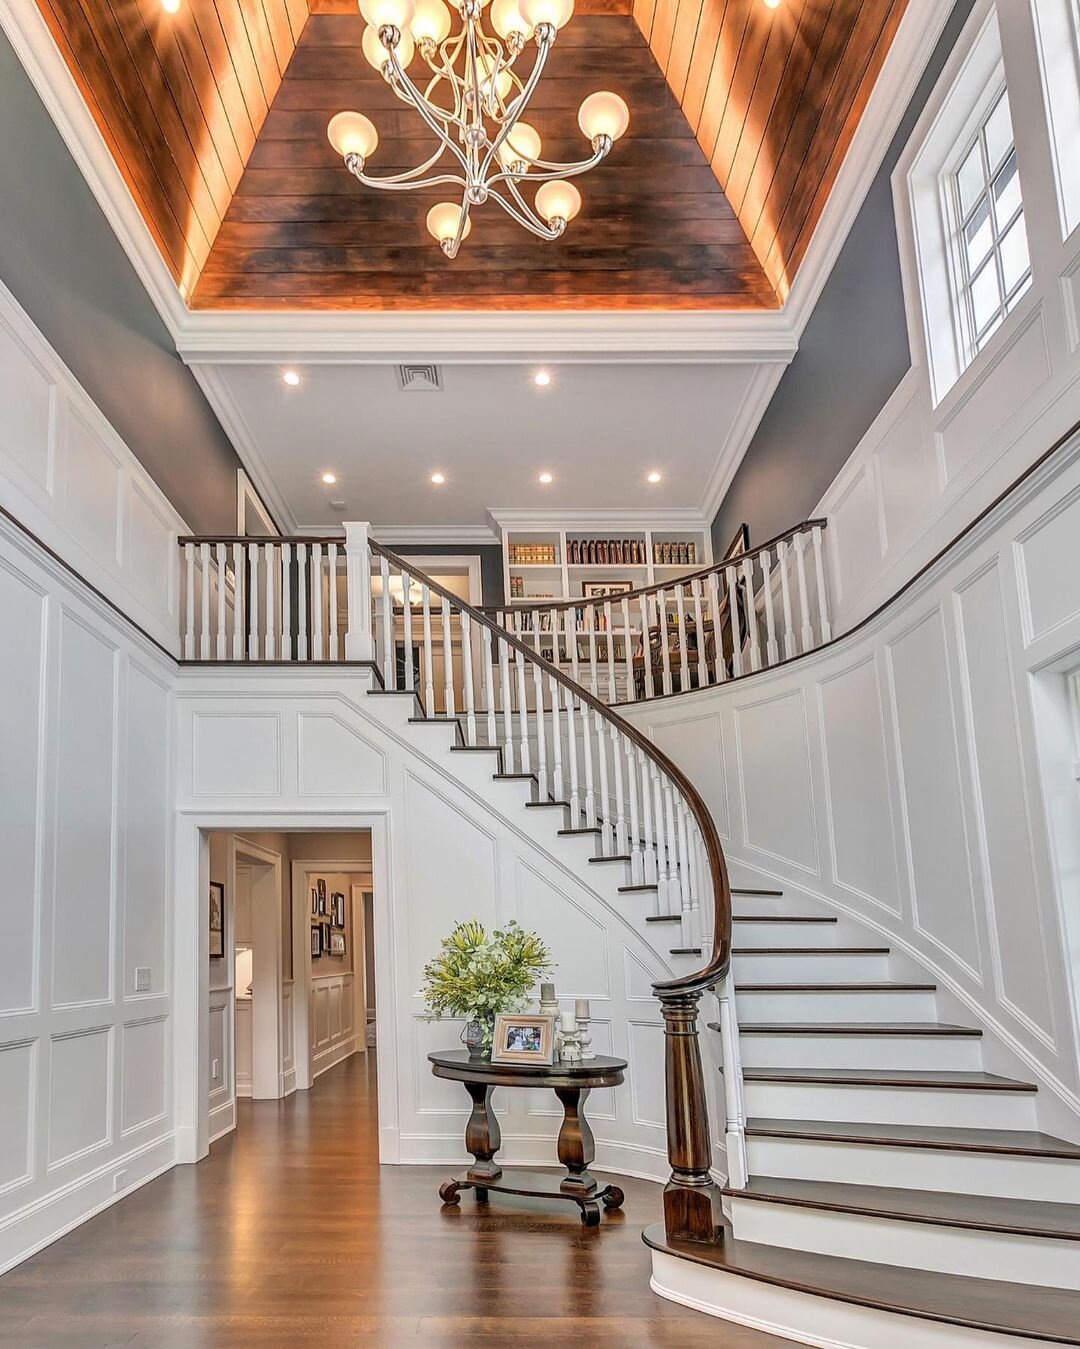 LOVE this #GrandFoyer! What do you think?! 😍 #HomeInspo
----------------------------------⁠⁠⠀⠀ ⠀ ⠀
Interested in building your dream home? Contact us! ⠀
☎️: (416) 816-4313 ⠀ ⠀ ⠀ ⠀
✉️: info@prestigecustomhome.com ⠀ ⠀
---------------------------------